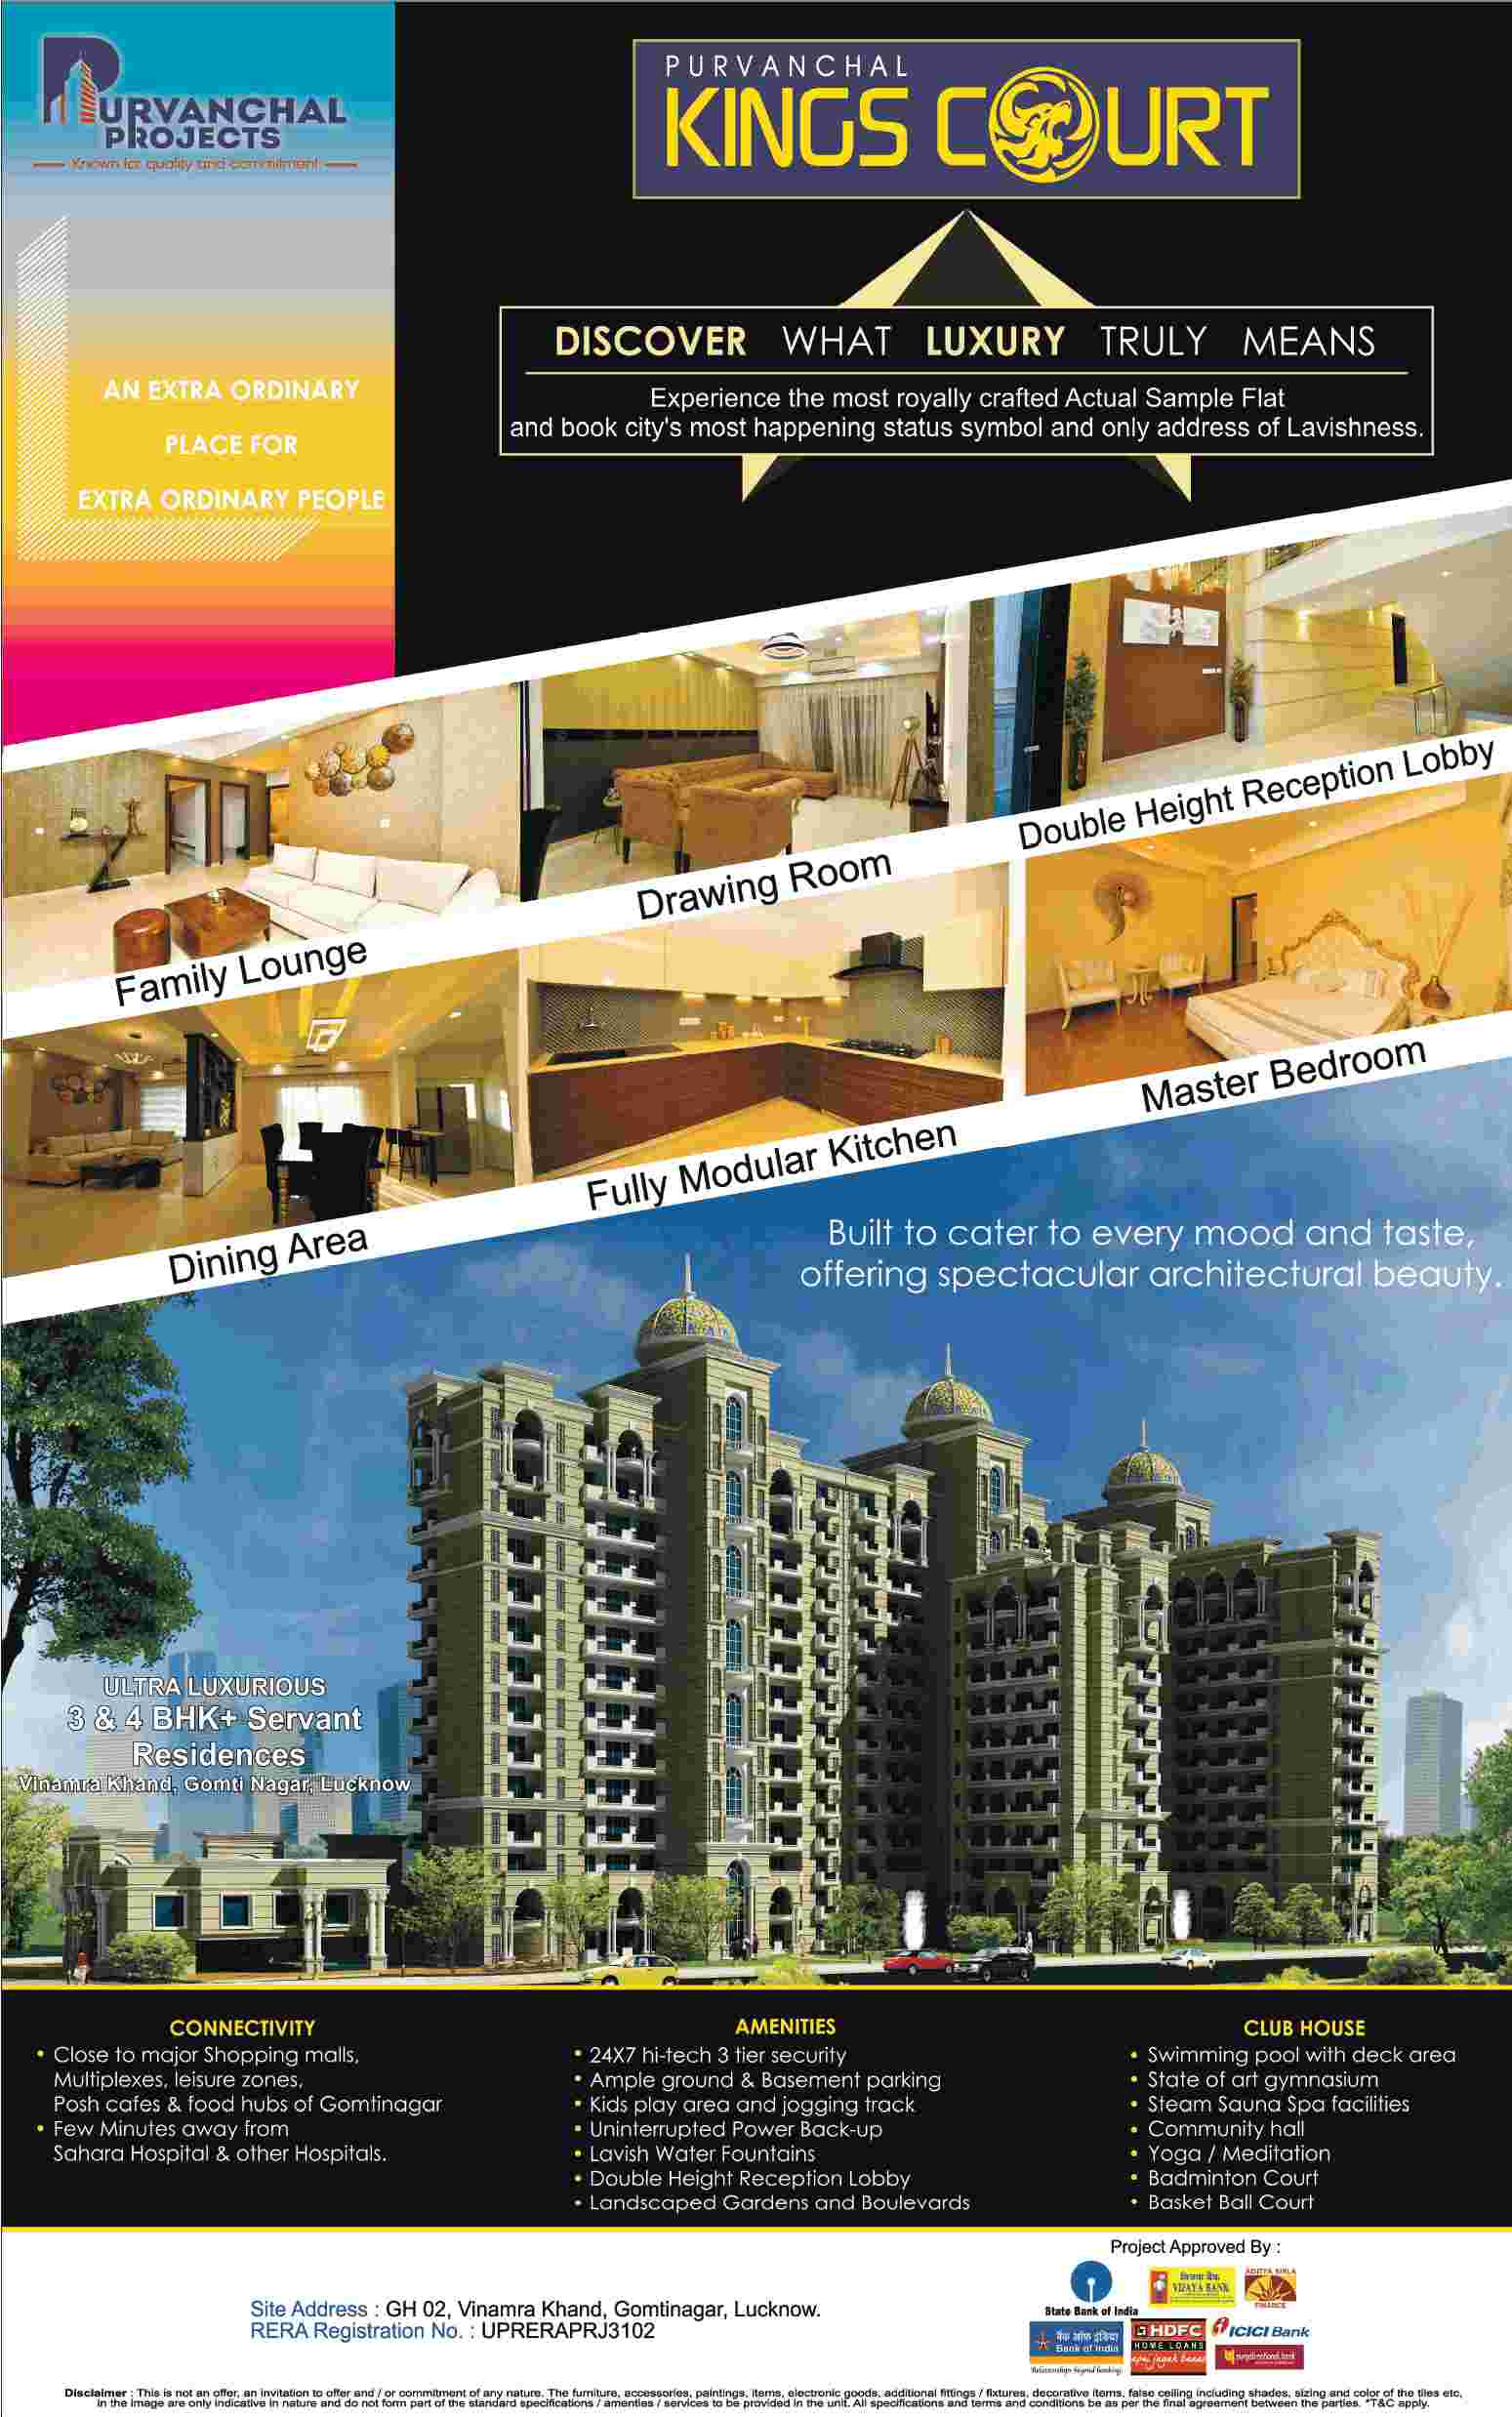 Experience the most royally crafted sample flat at Purvanchal Kings Court in Lucknow